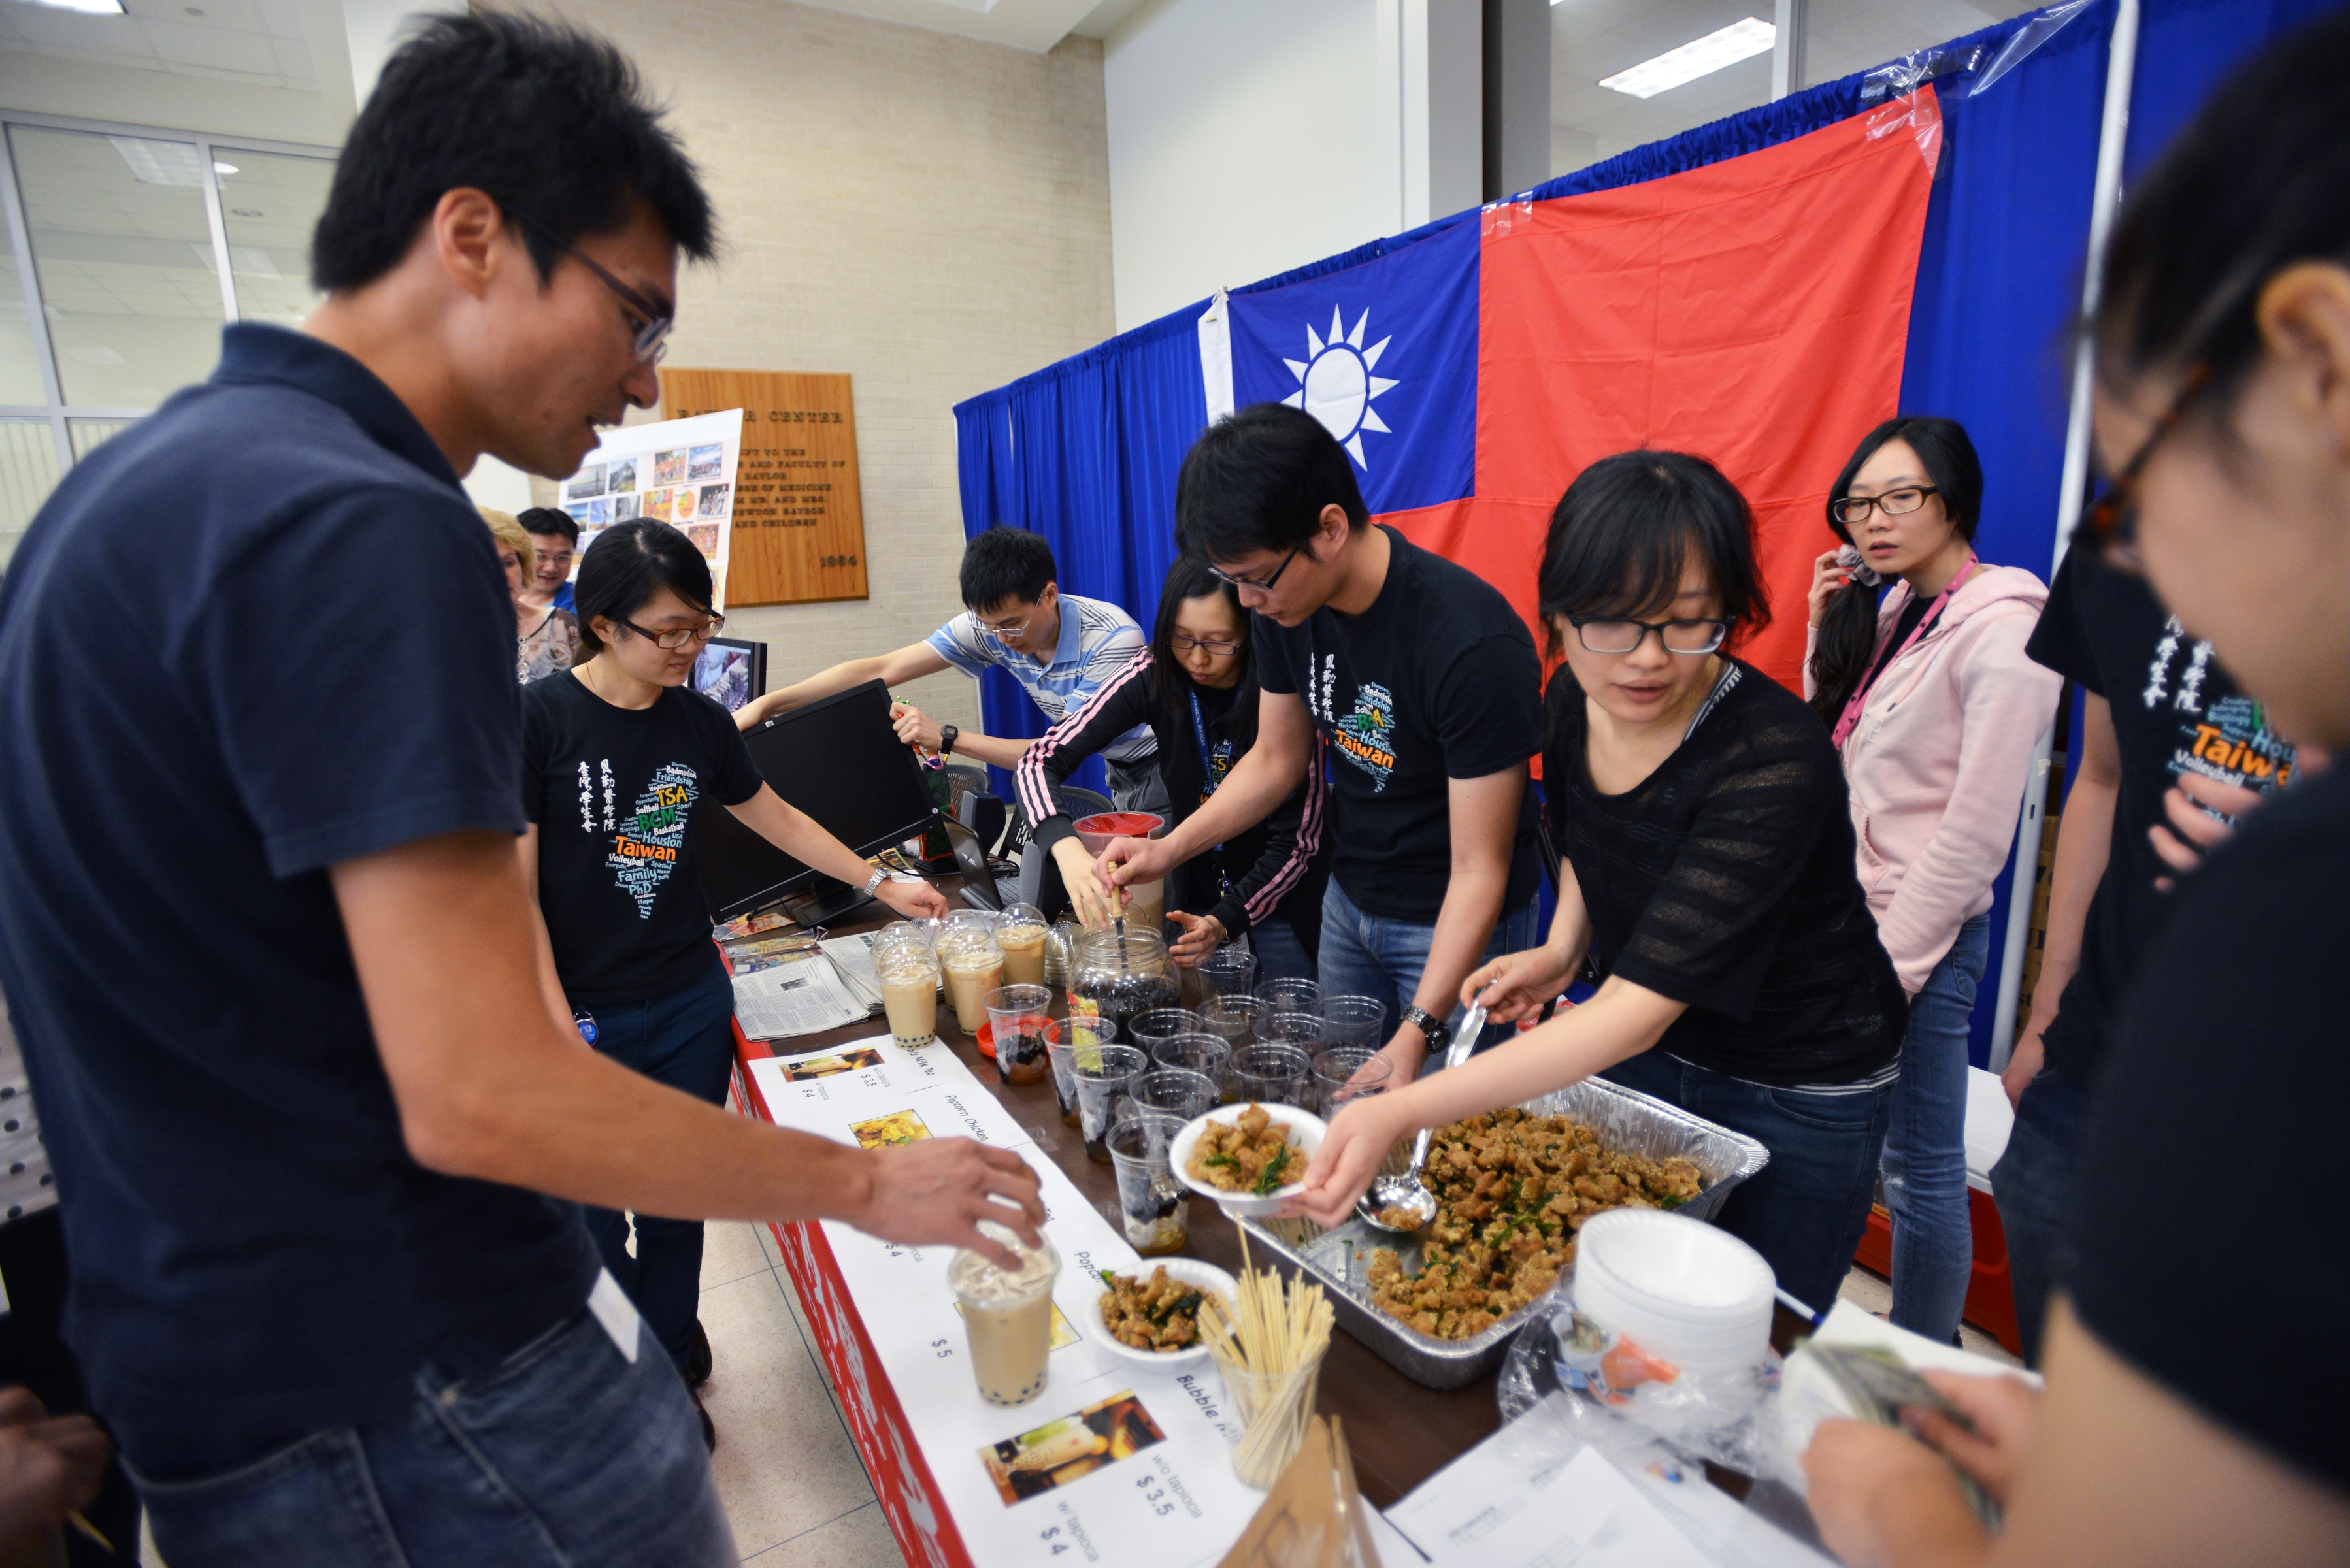 Students and trainees showcasing food from around the world.